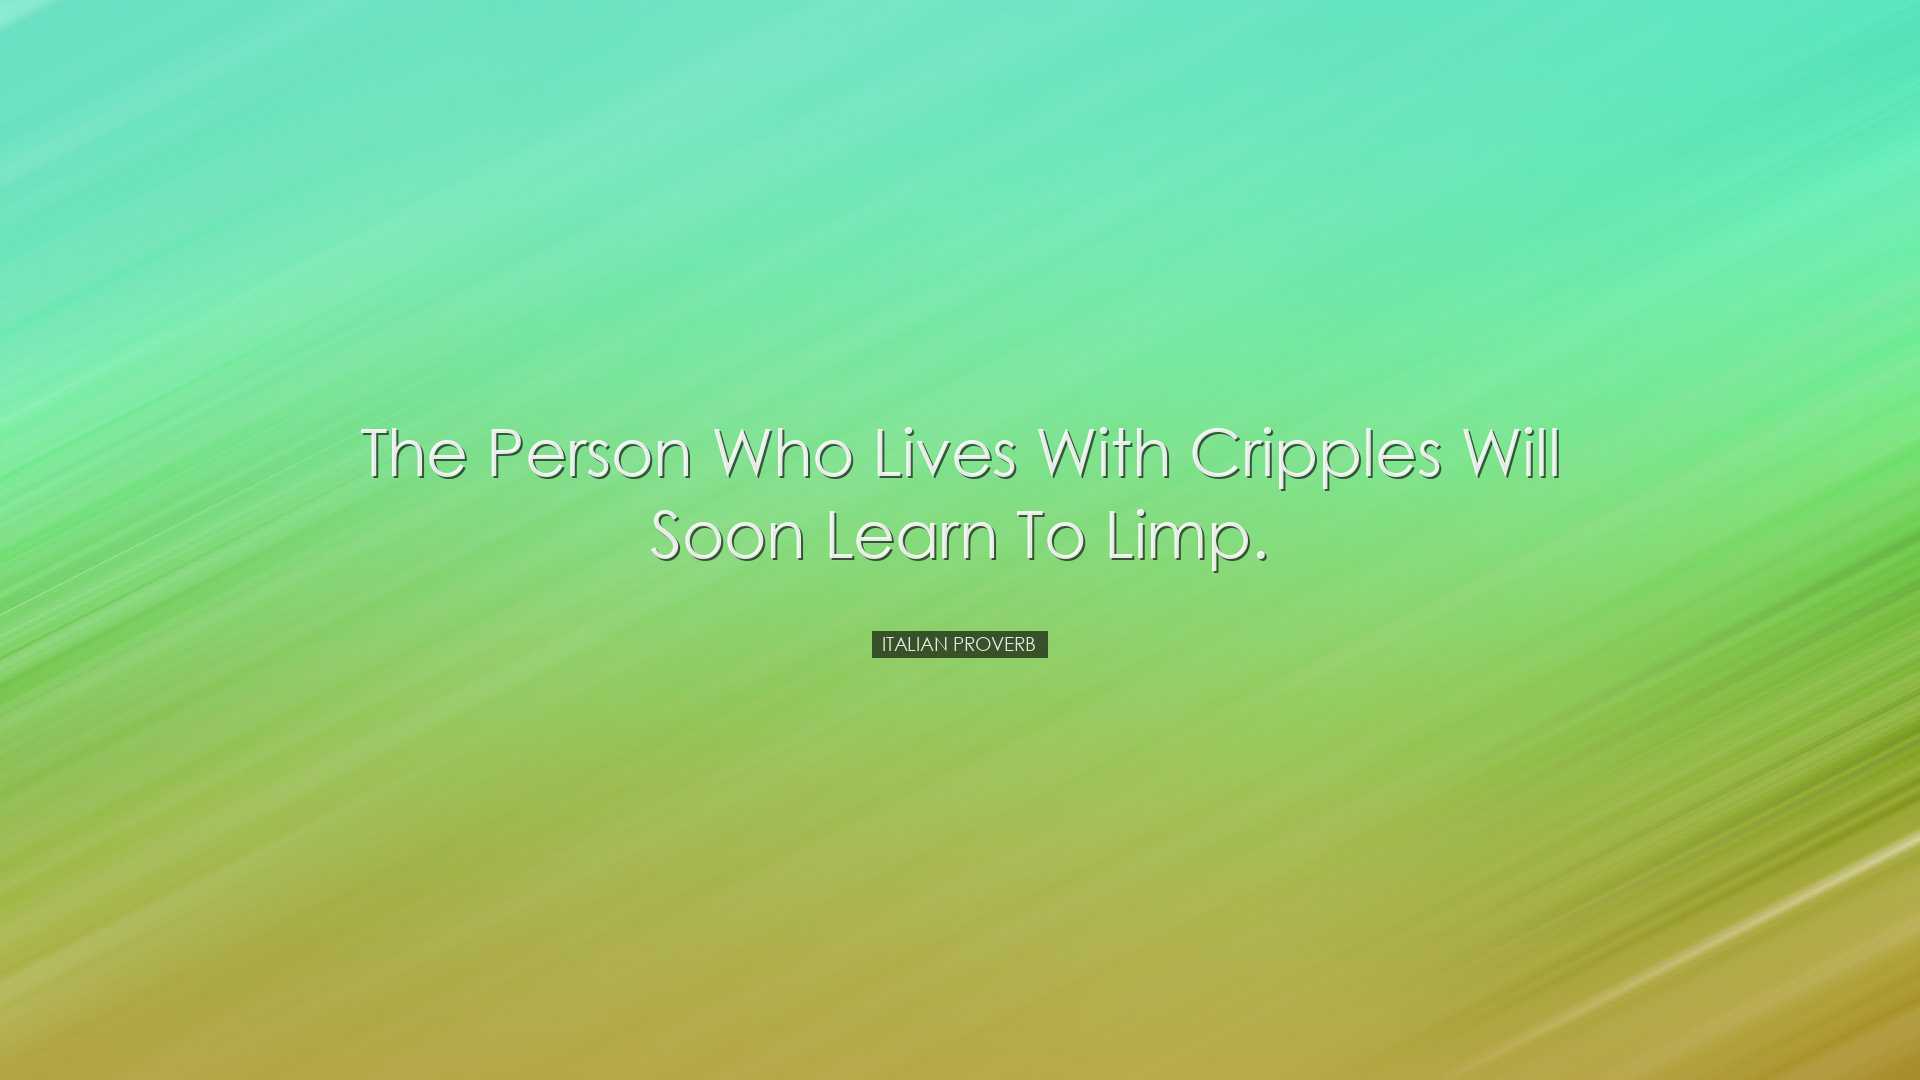 The person who lives with cripples will soon learn to limp. - Ital